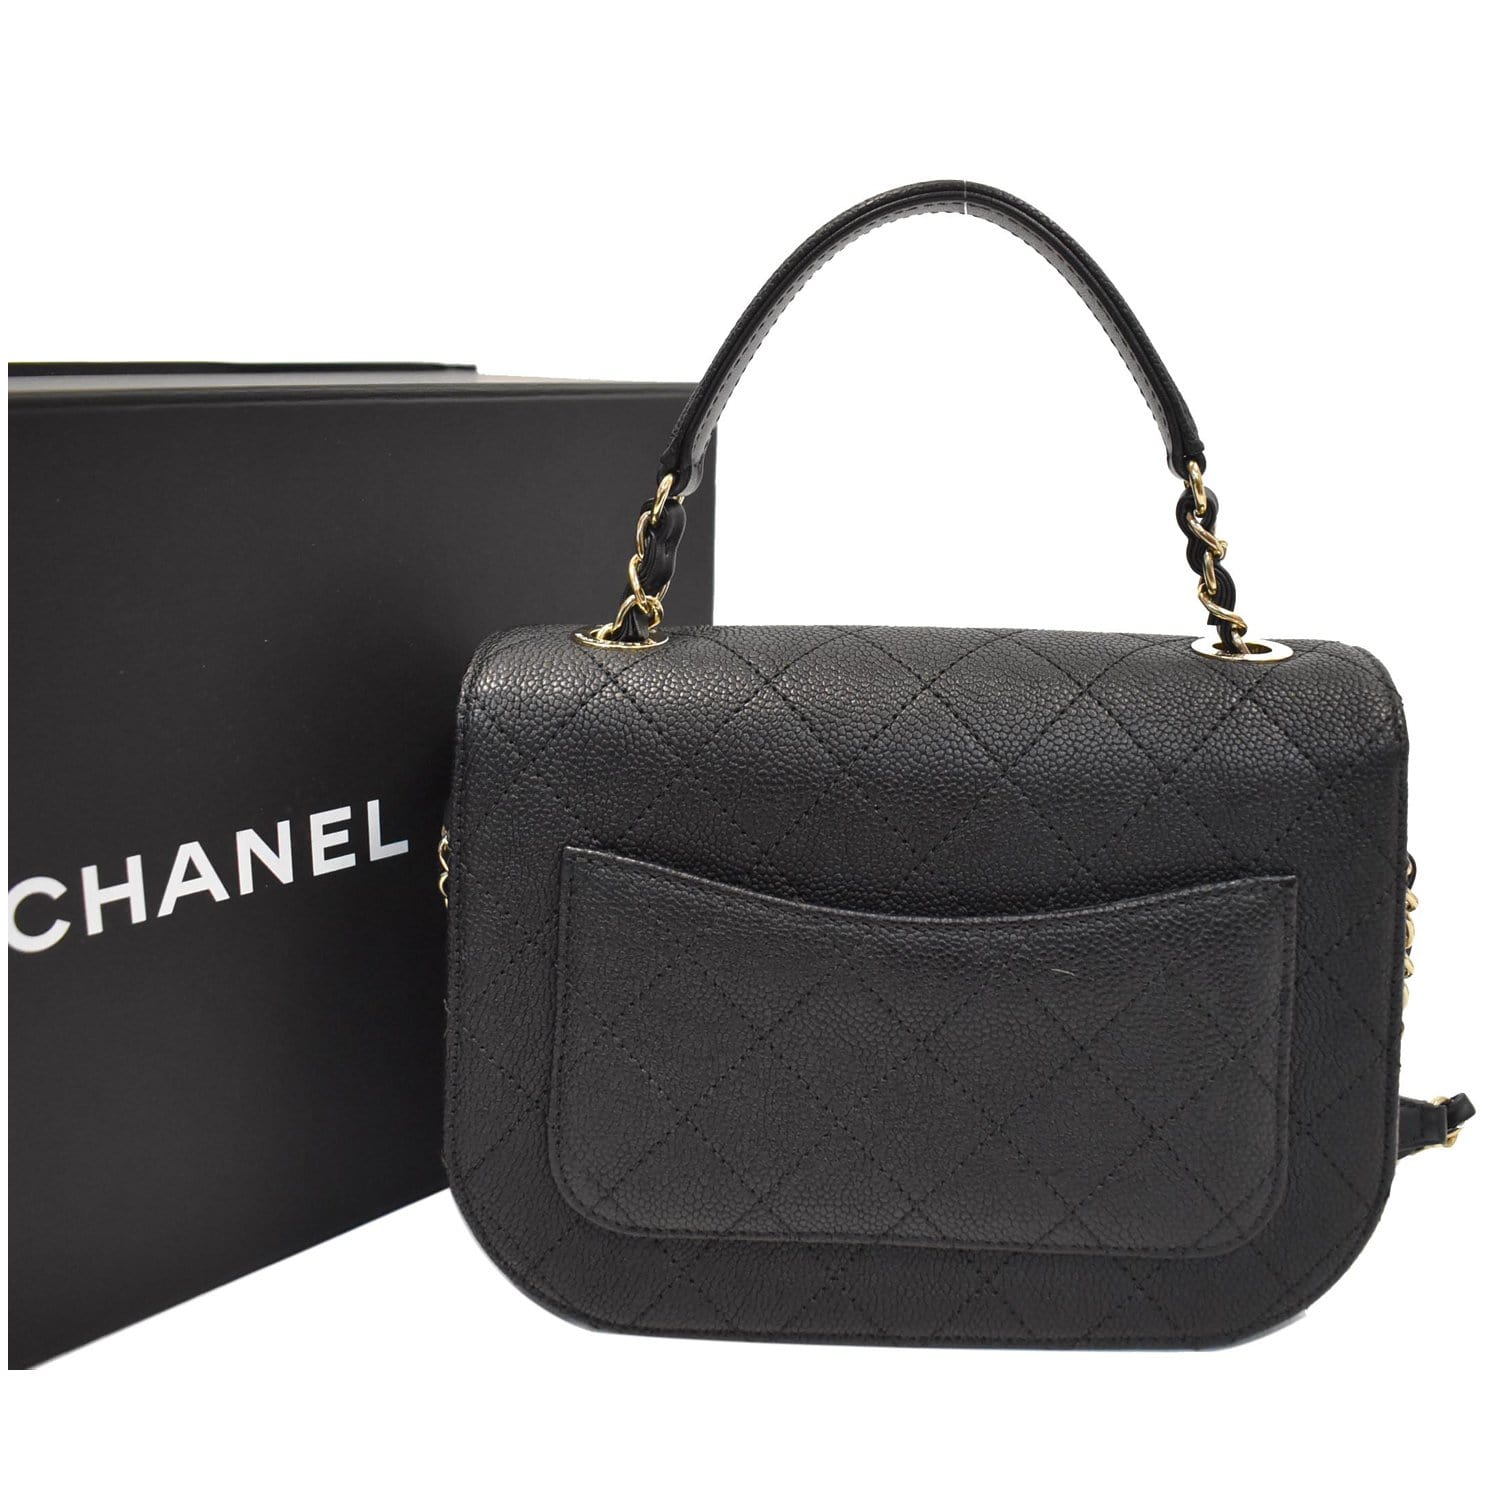 CHANEL Coco Cuba Quilted Grained Calfskin Leather Top Handle Bag Black